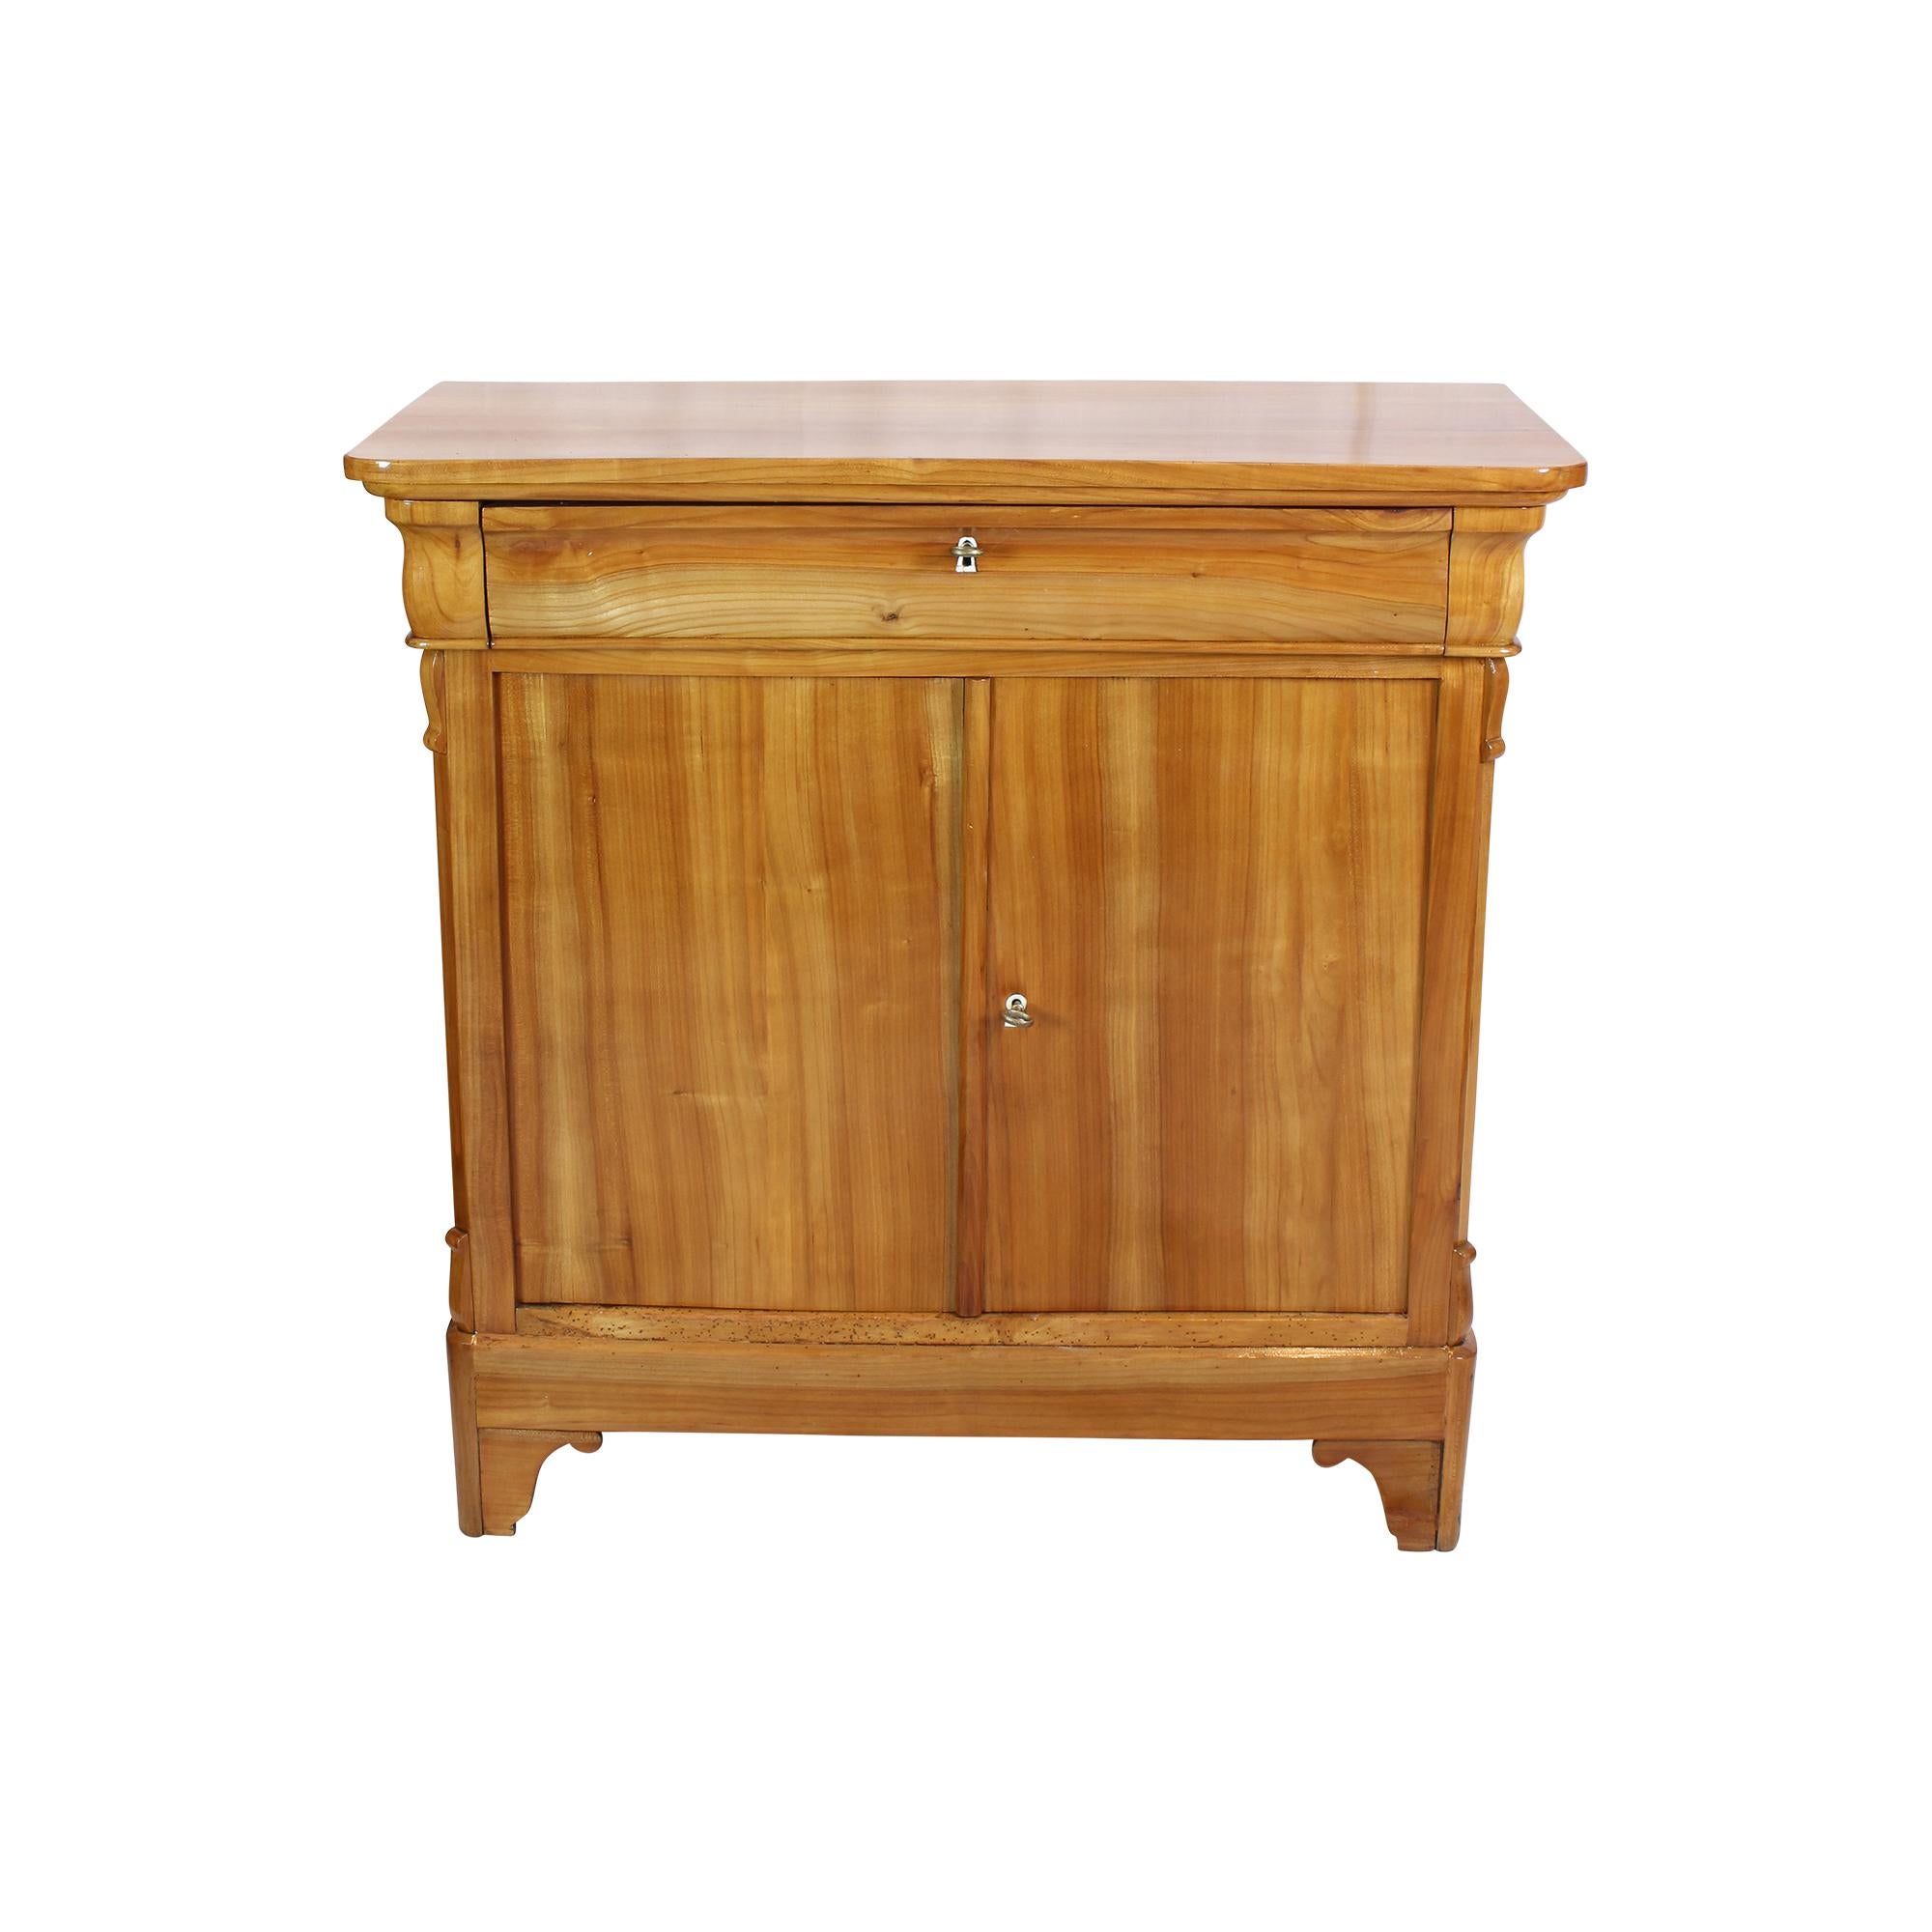 Early 19th Century Biedermeier Cherrywood Half Cabinet / Commode In Good Condition For Sale In Darmstadt, DE